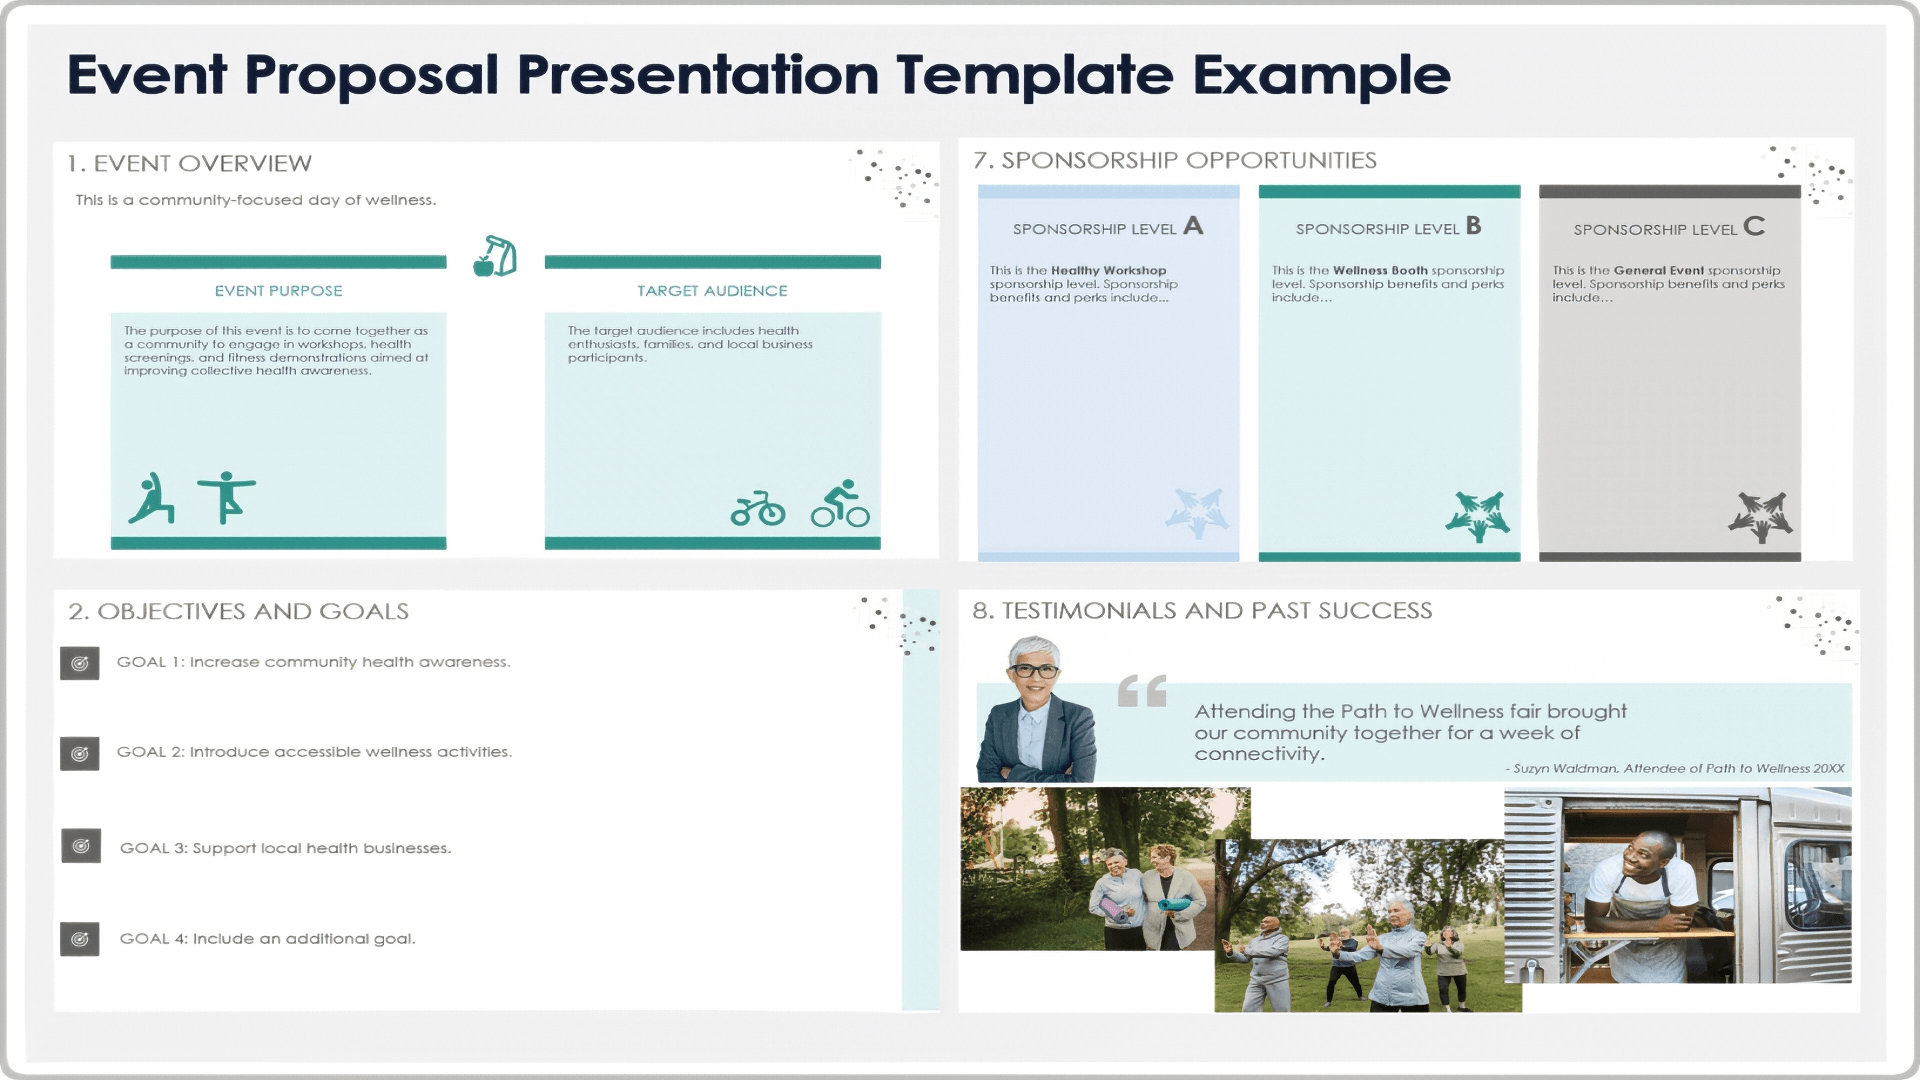 Event Proposal Presentation Template Example